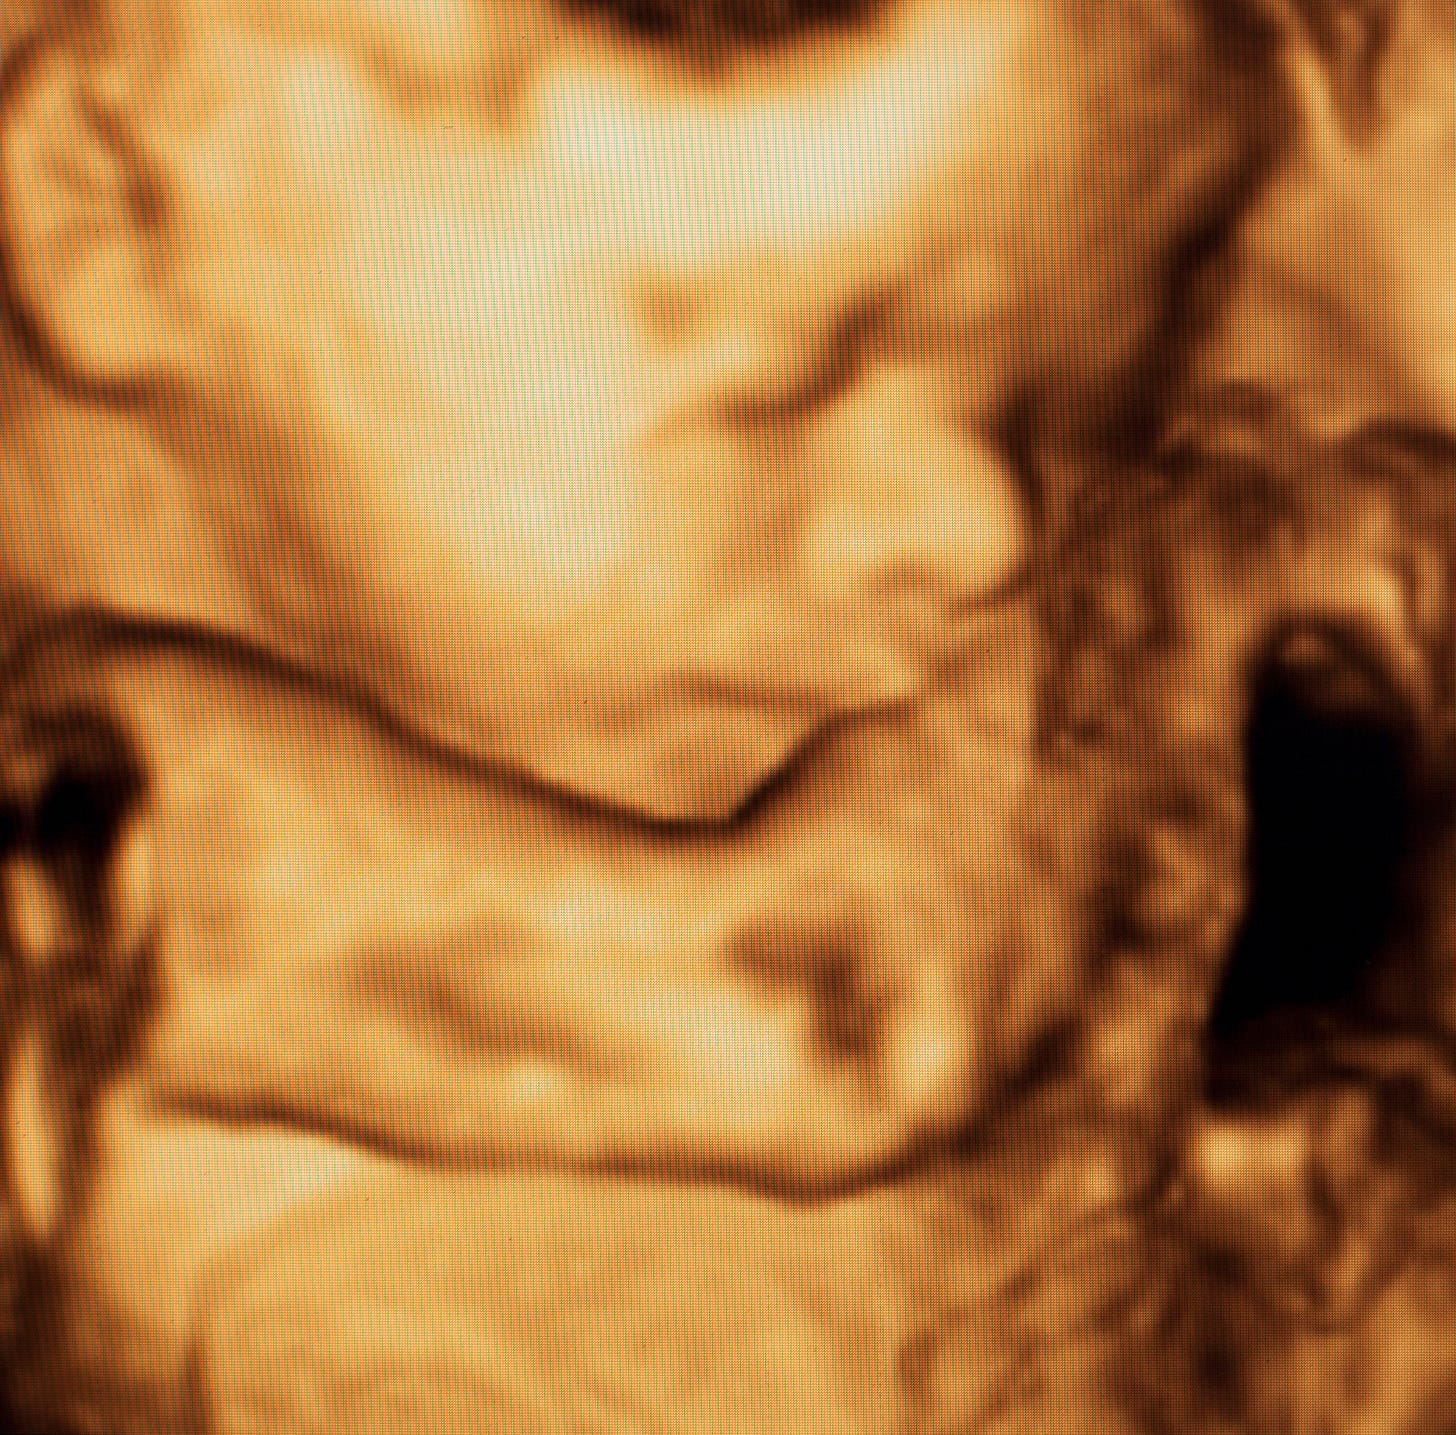 ultrasound of preborn baby, showing the face